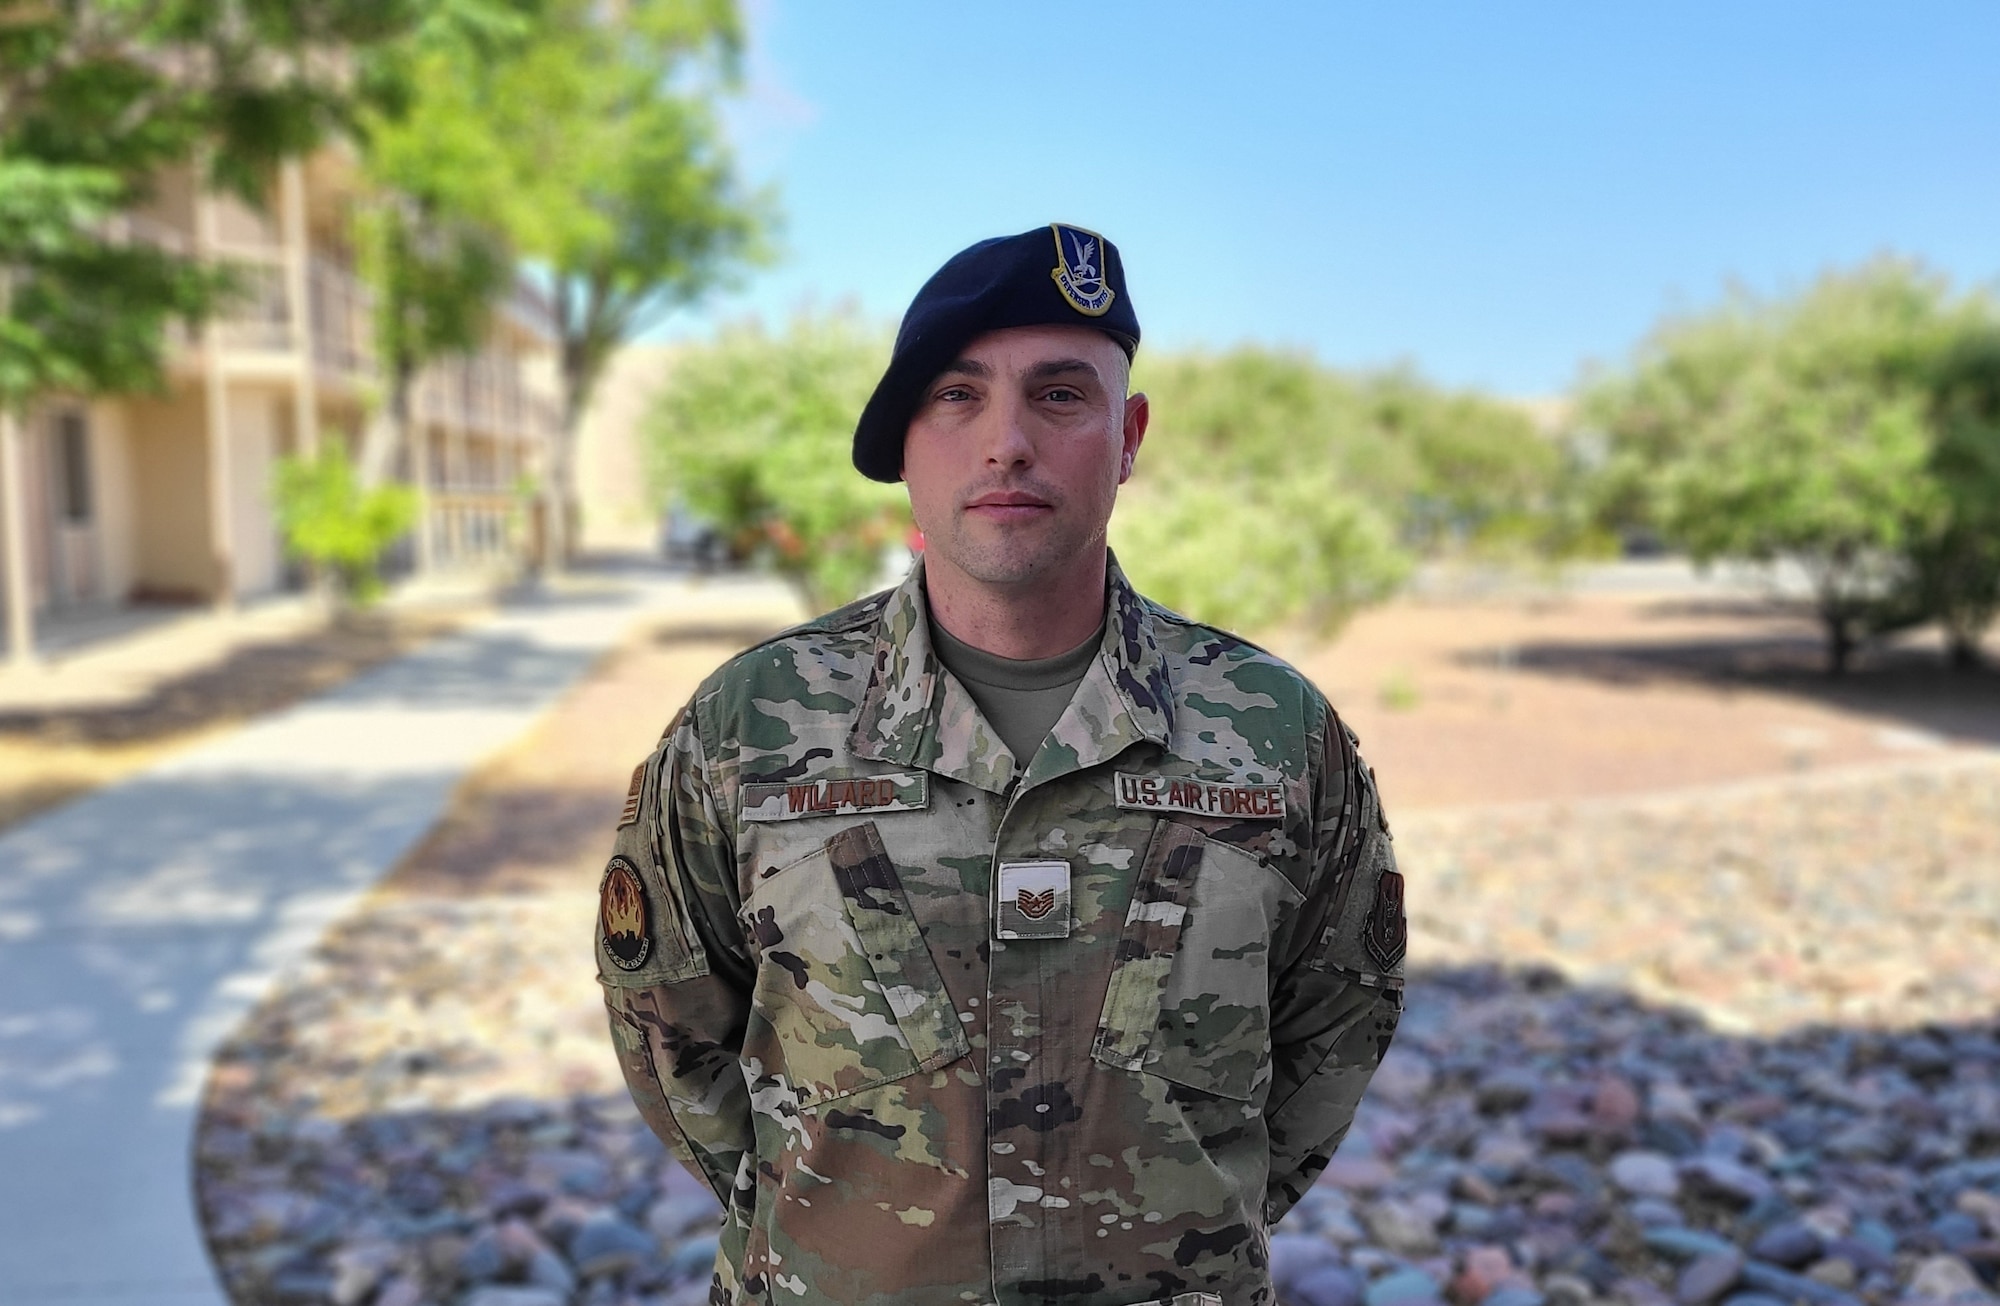 Tech. Sgt. Benjamin Willard, 926 Security Forces Squadron, recently received the Air Force Commendation Medal for heroism for  his actions during the Route 91 Harvest Festival shooting.  As the third anniversary approaches, Willard explains how he's dealt with the mental health aspect of that night since then.